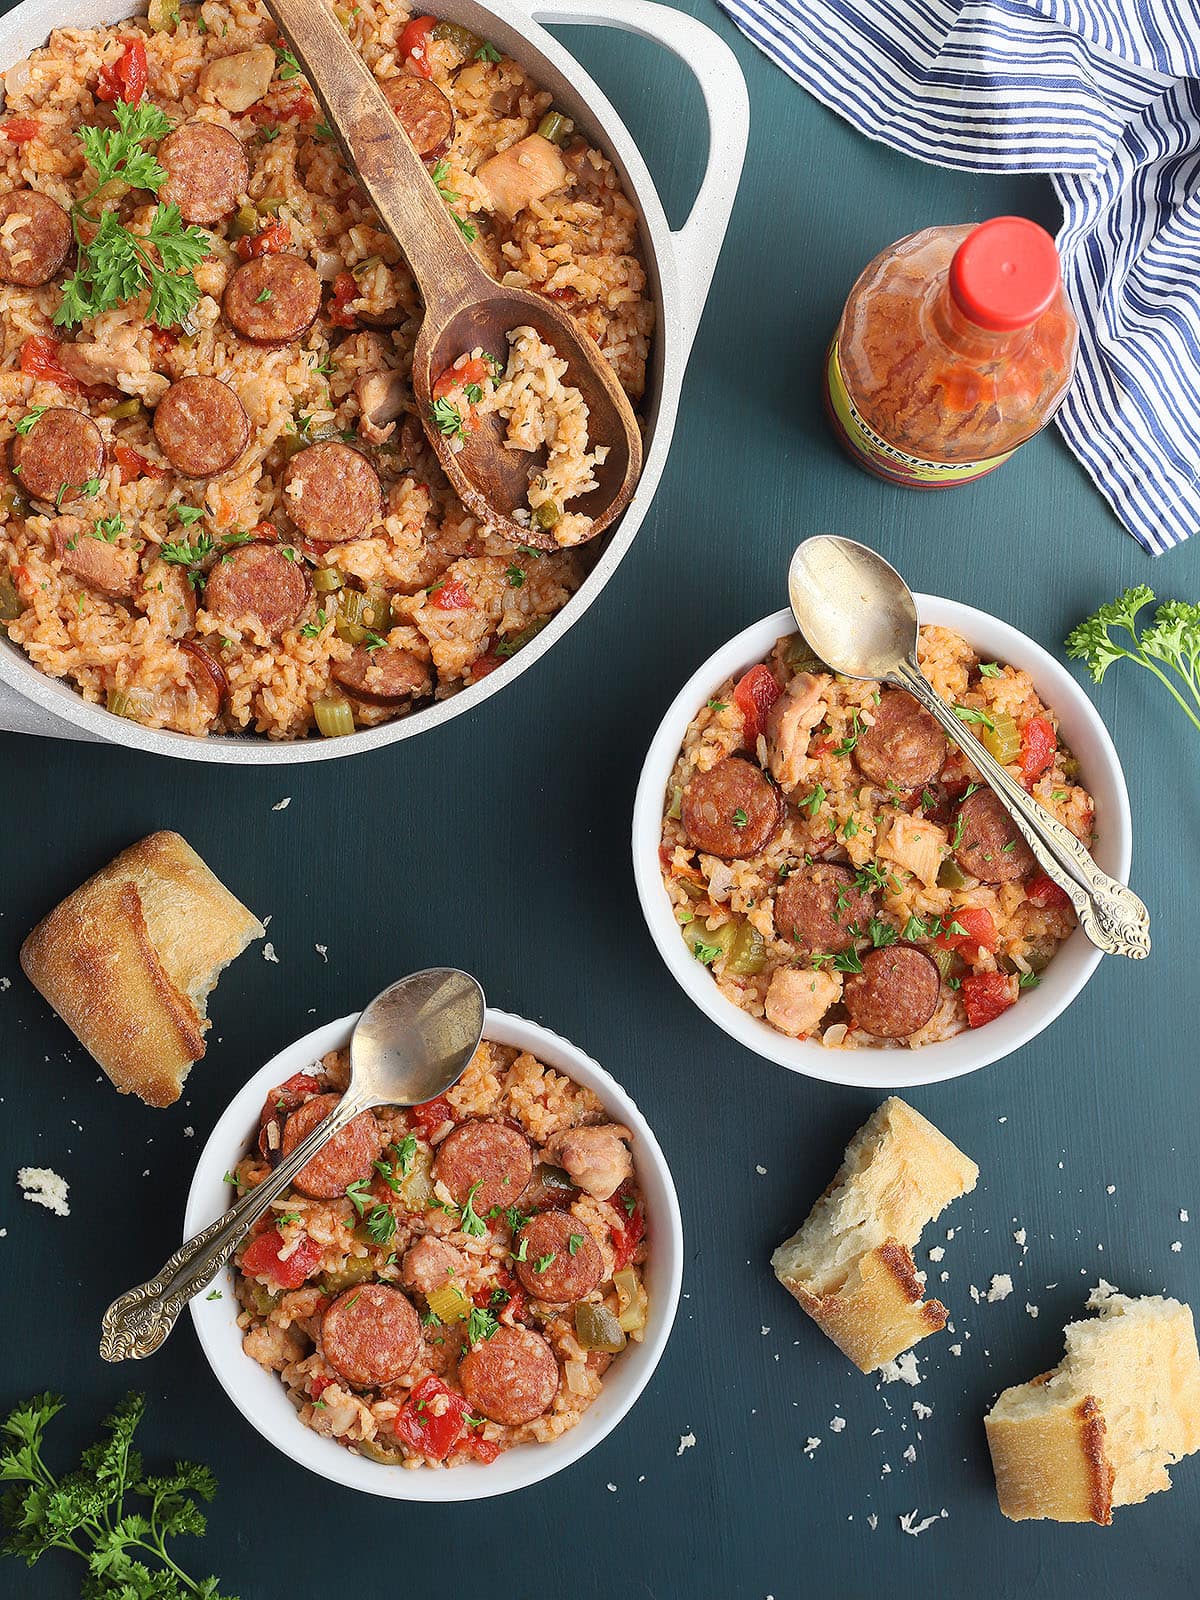 A serving dish and two bowls of chicken jambalaya with crust bread broken on the side